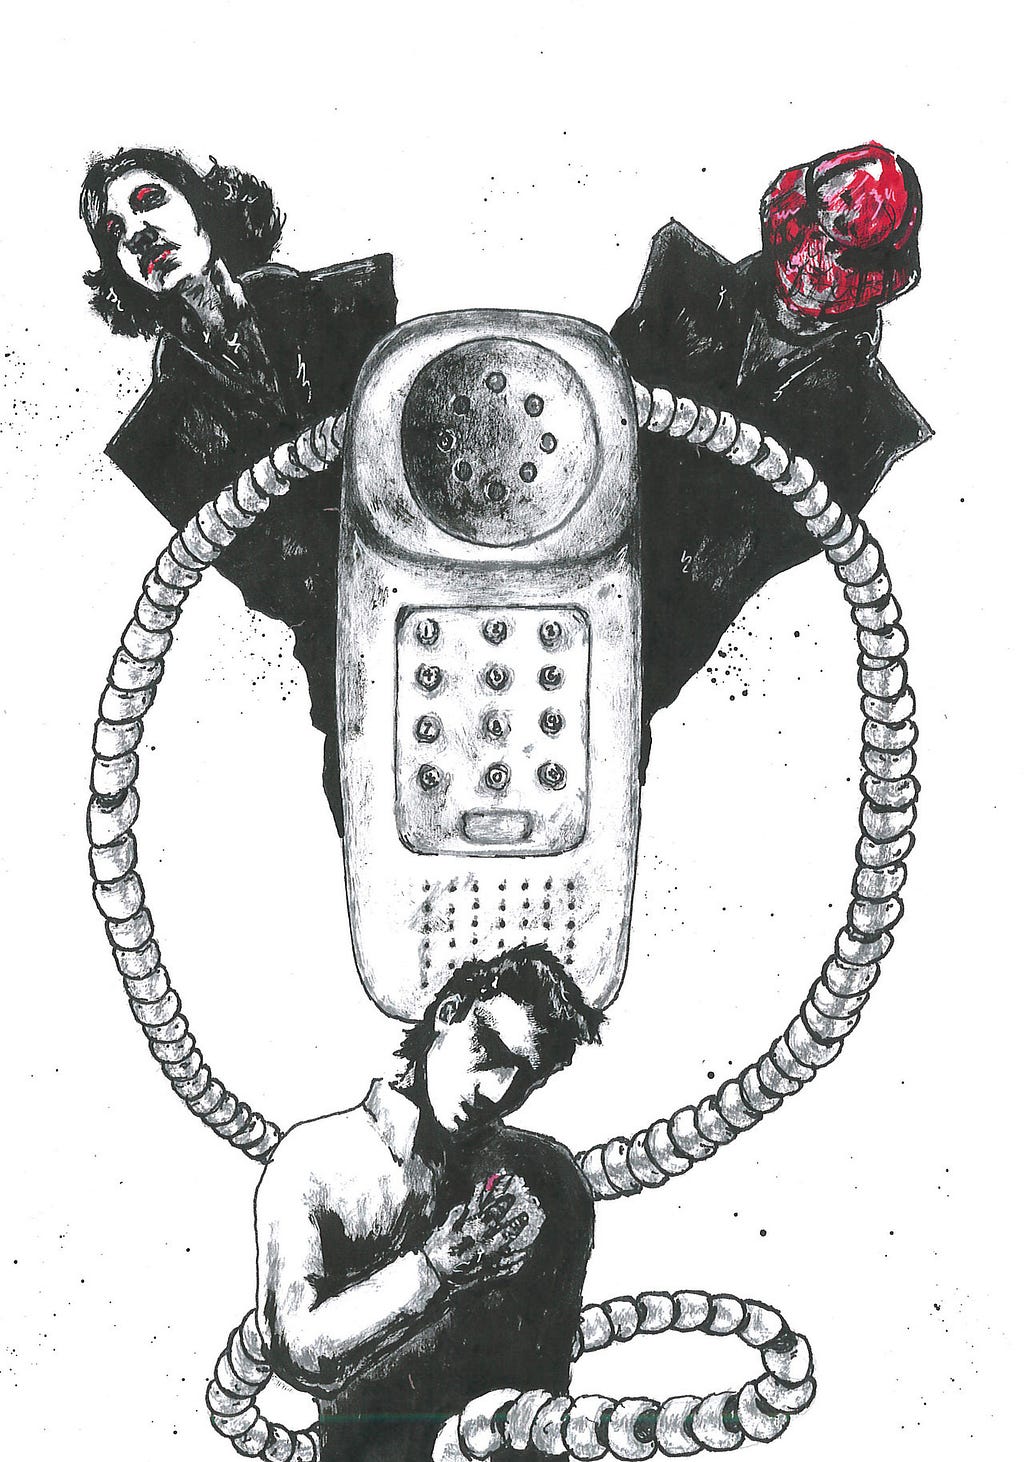 Two women on phone call with man